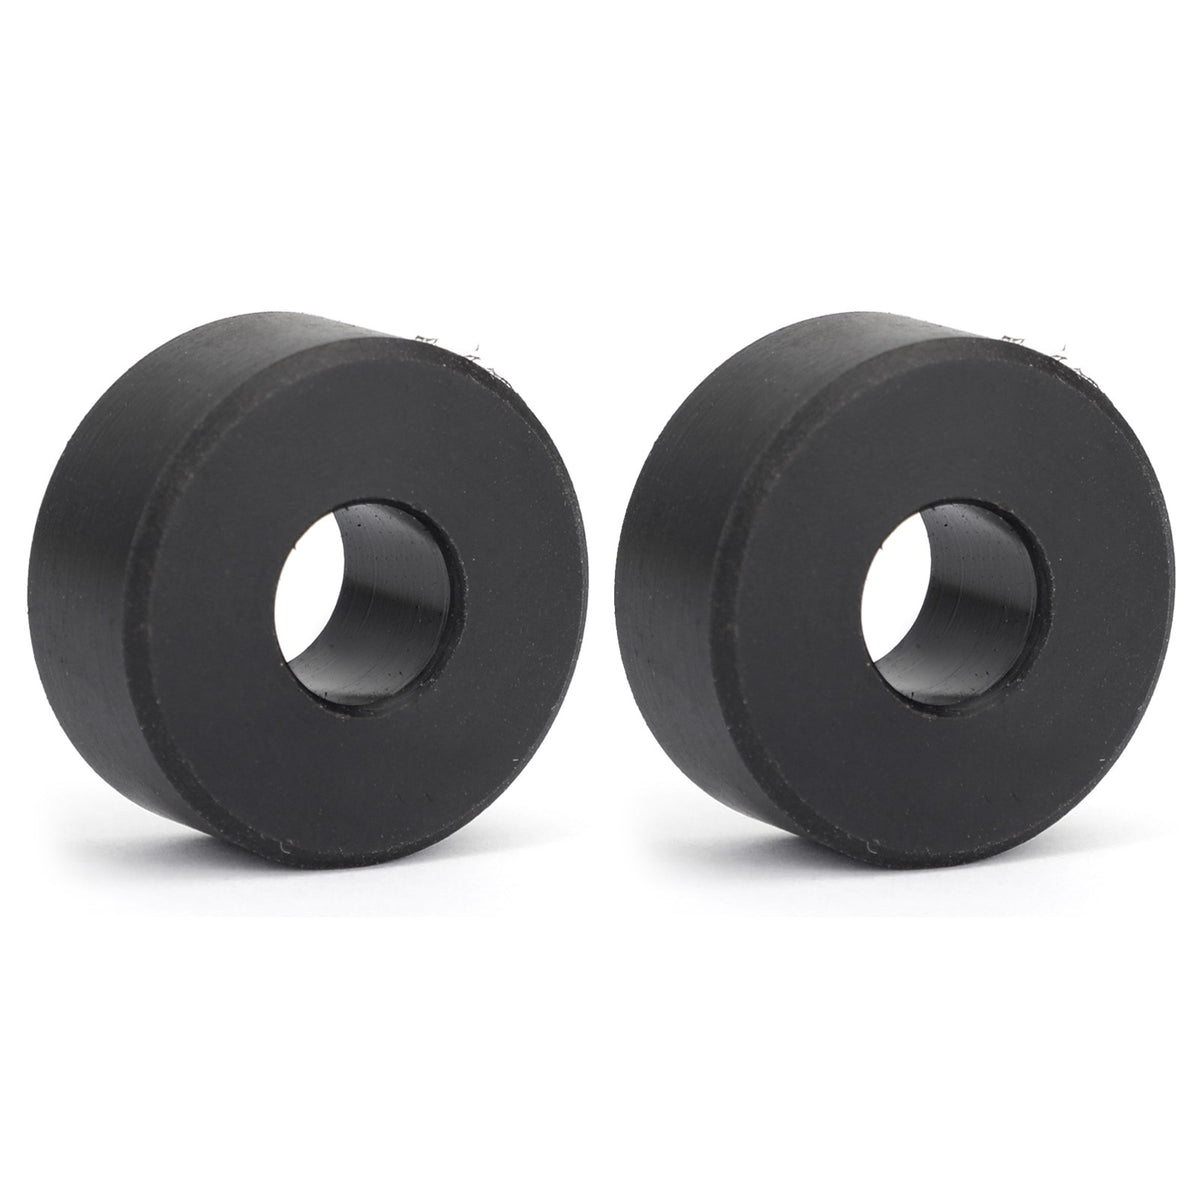 Pair Secondary Clutch Rollers for Polaris RZR Ranger ACE 570 900 2013-2019